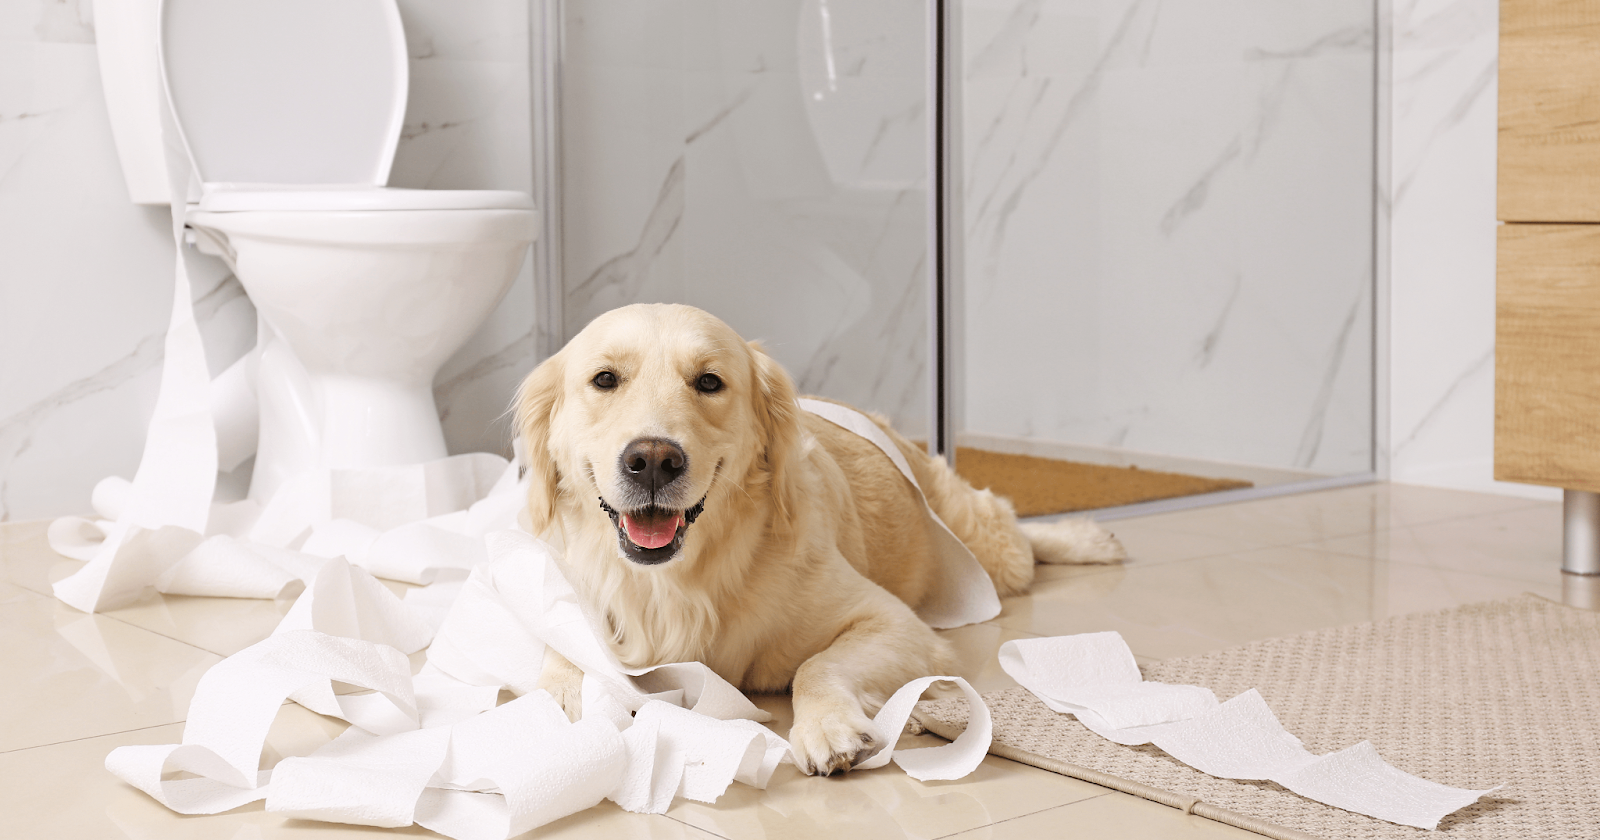 Happy Golden Retriever laying in front of toilet in pile of toilet paper